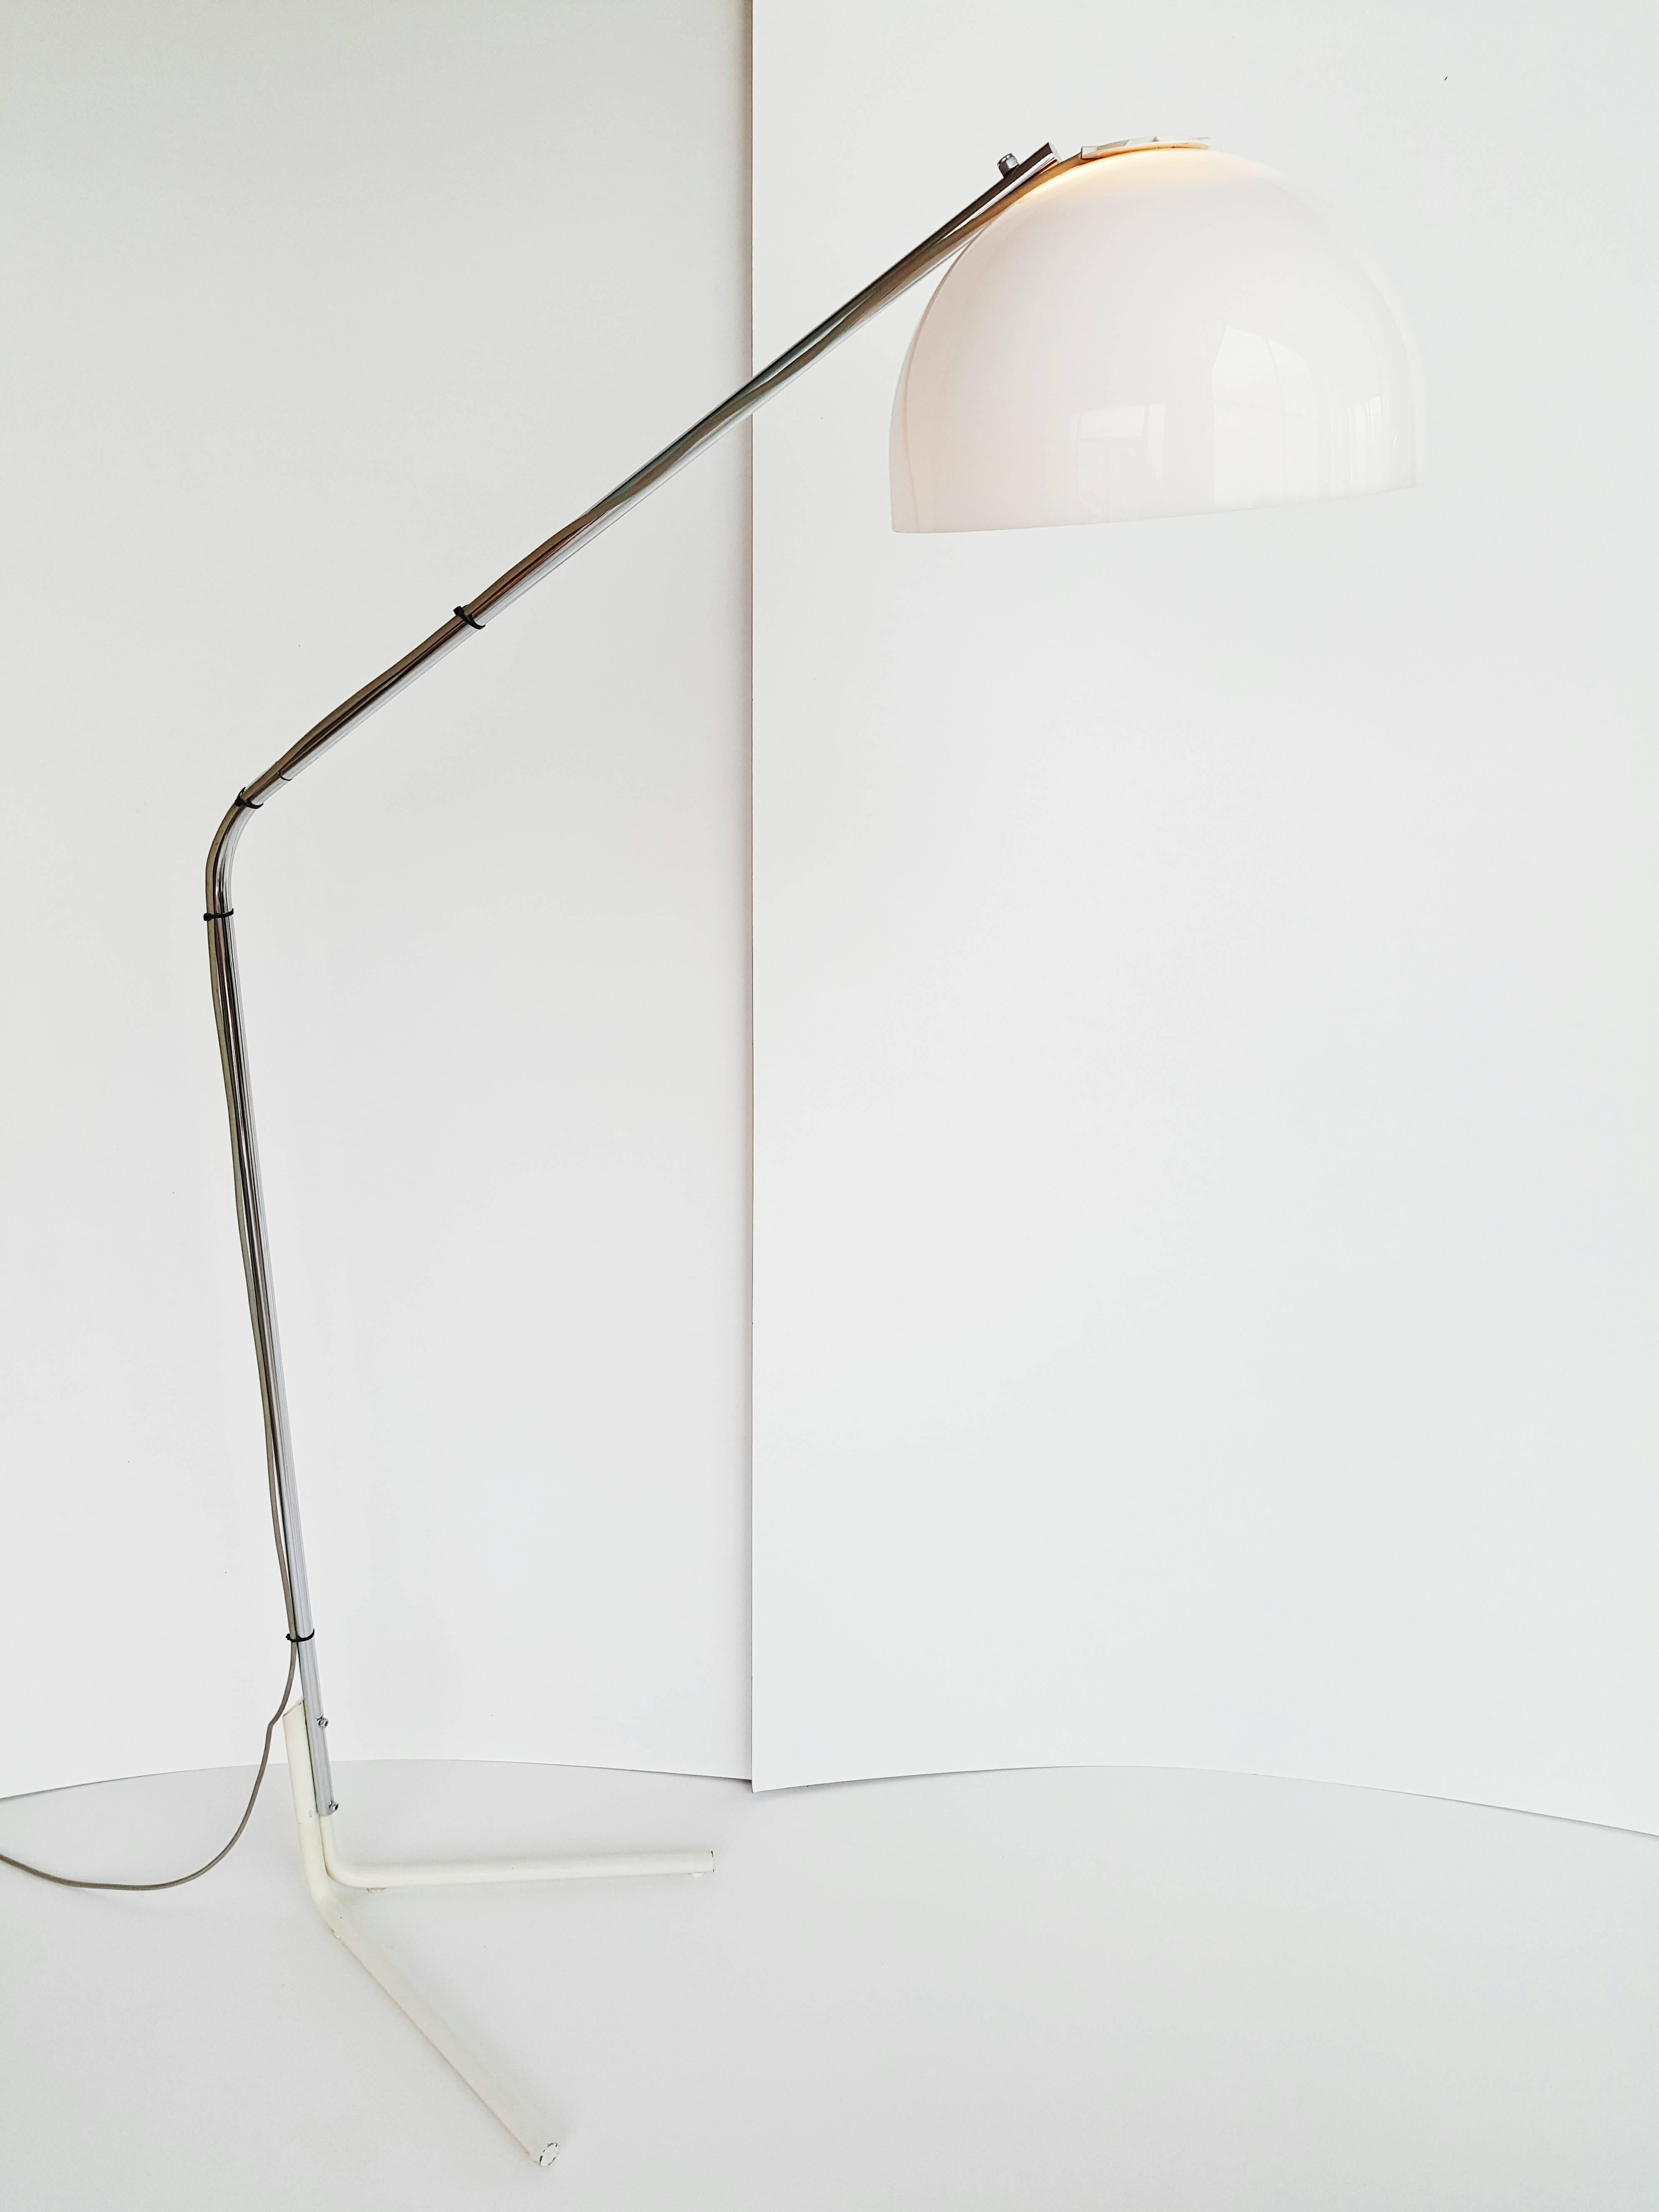 Rare floor lamp by Estudi Blanc for Tramo in 1968.
Lampshade in the white Perspex, adjustable up and down,
The assembly is very heavy and the very high quality.
Lampshade: 36 cms.